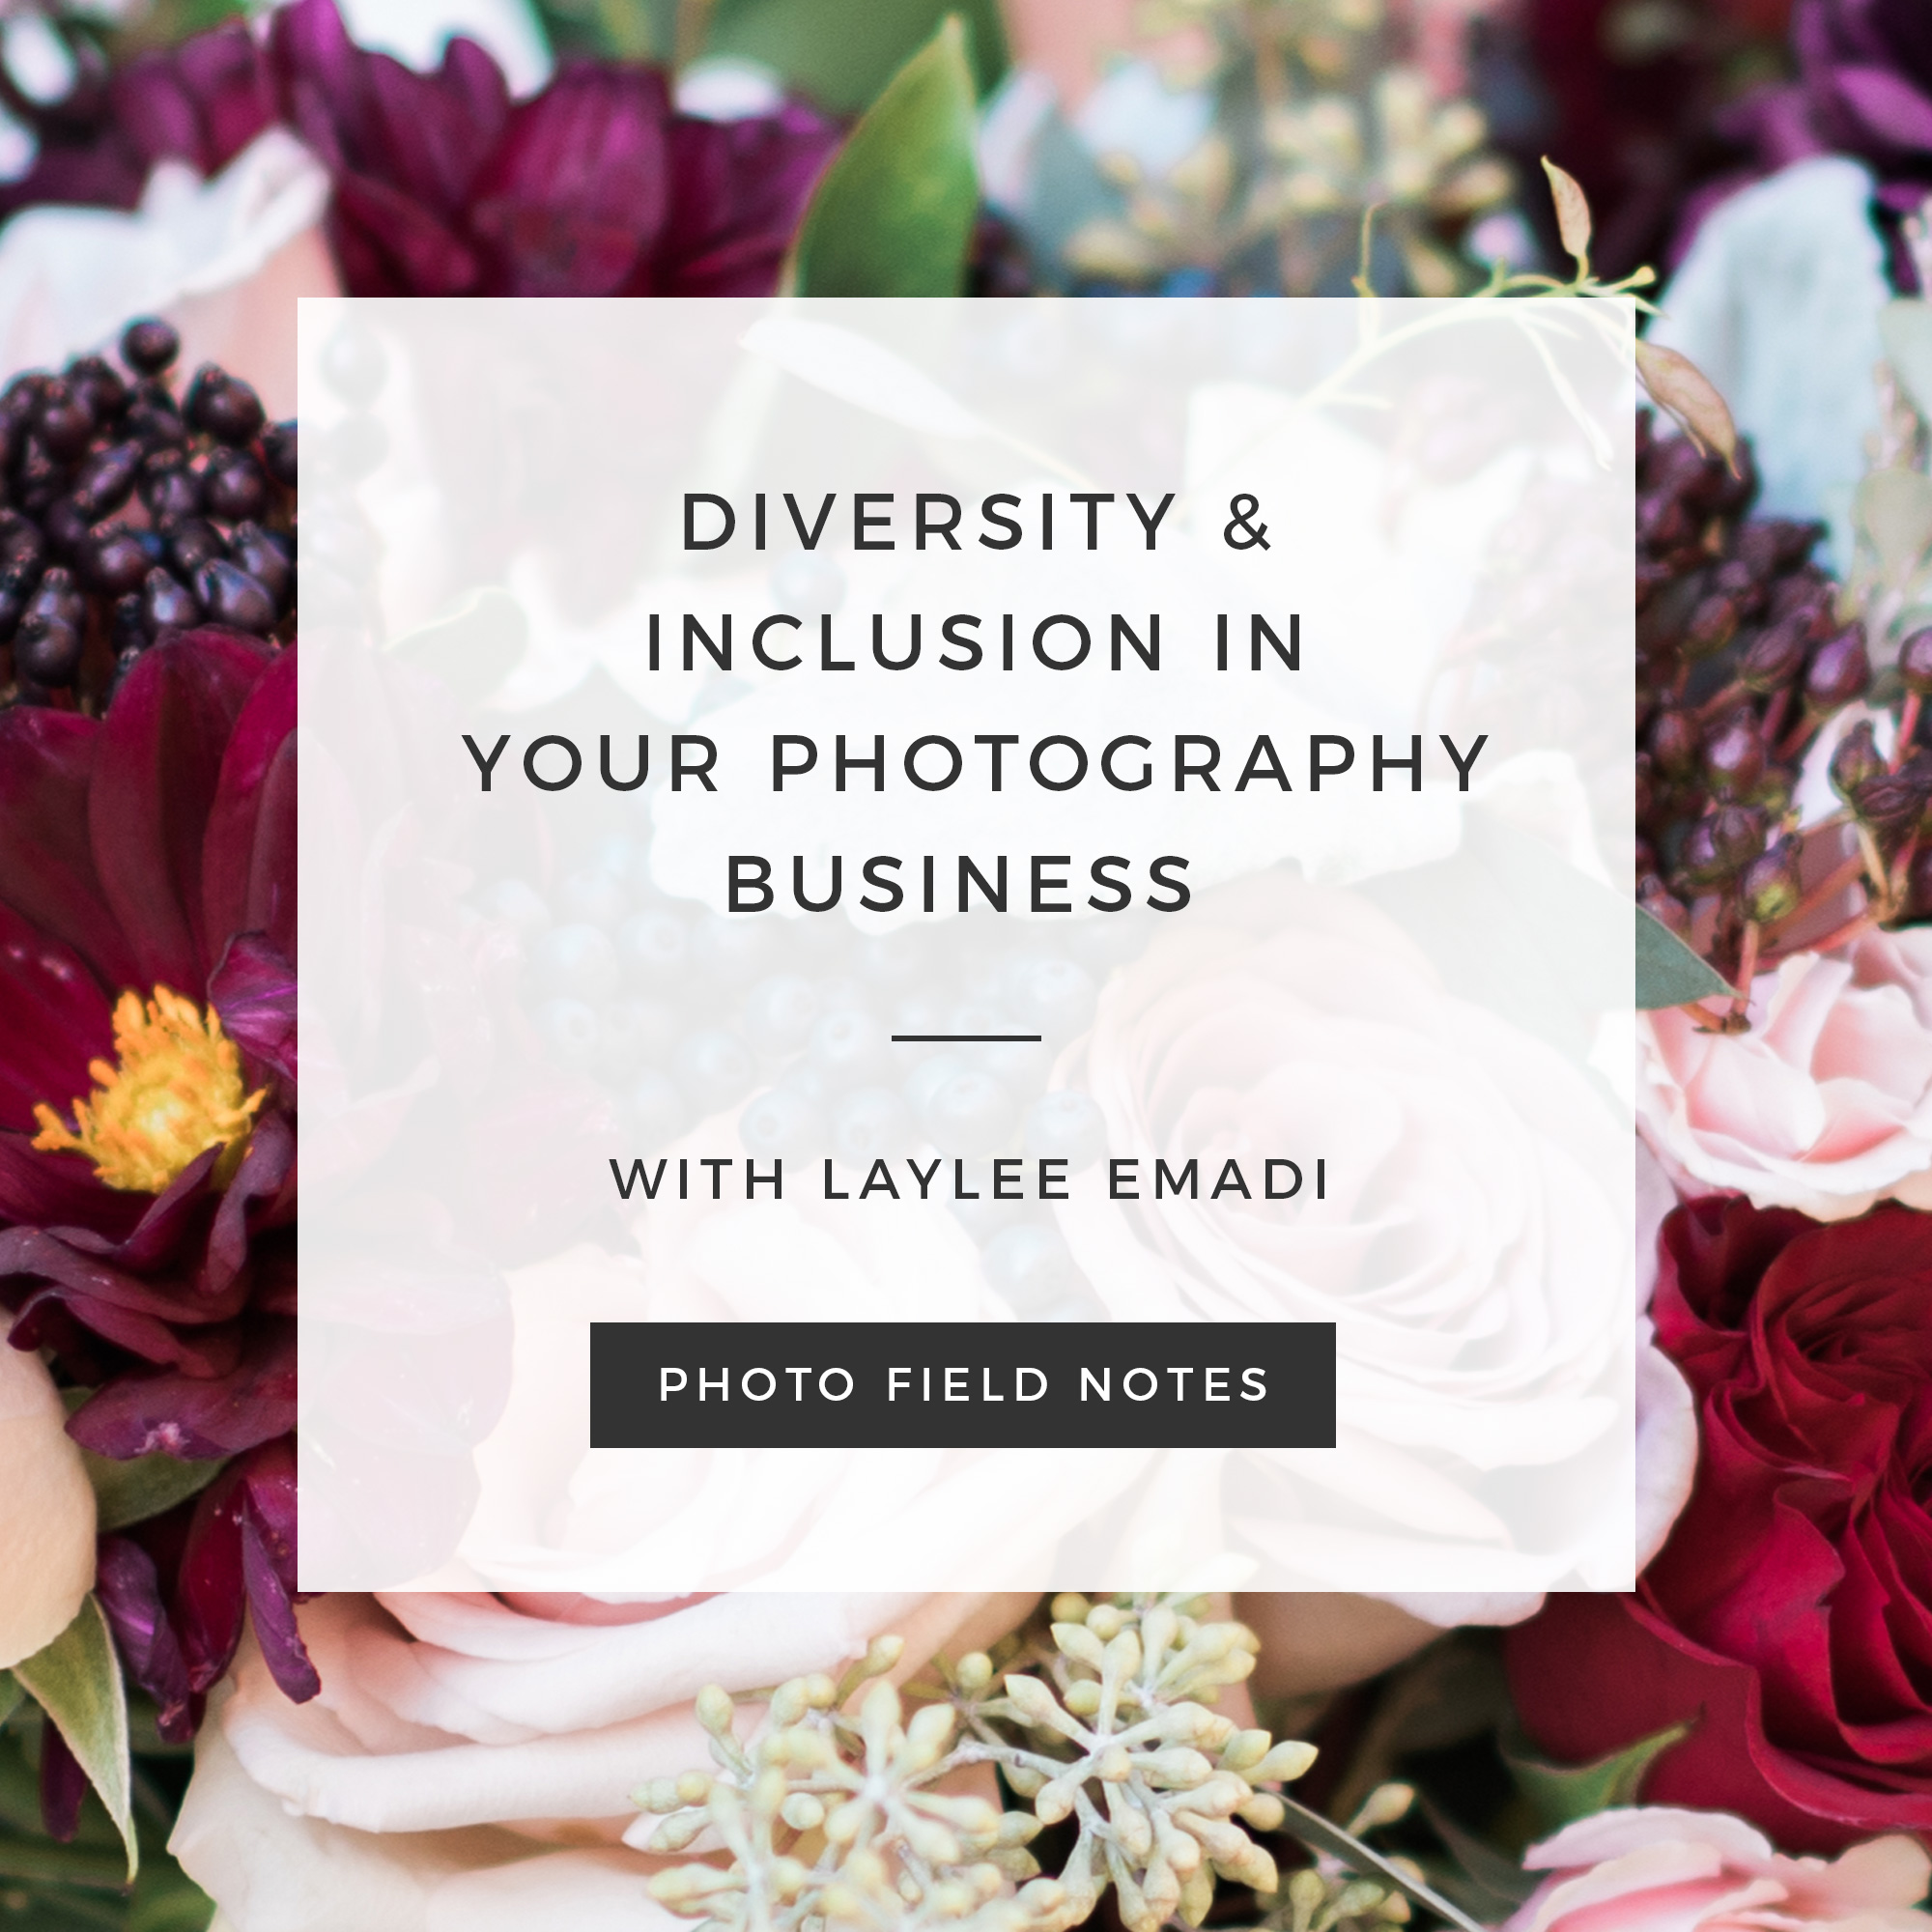 Diversity and inclusion in your photography business with Laylee Emadi